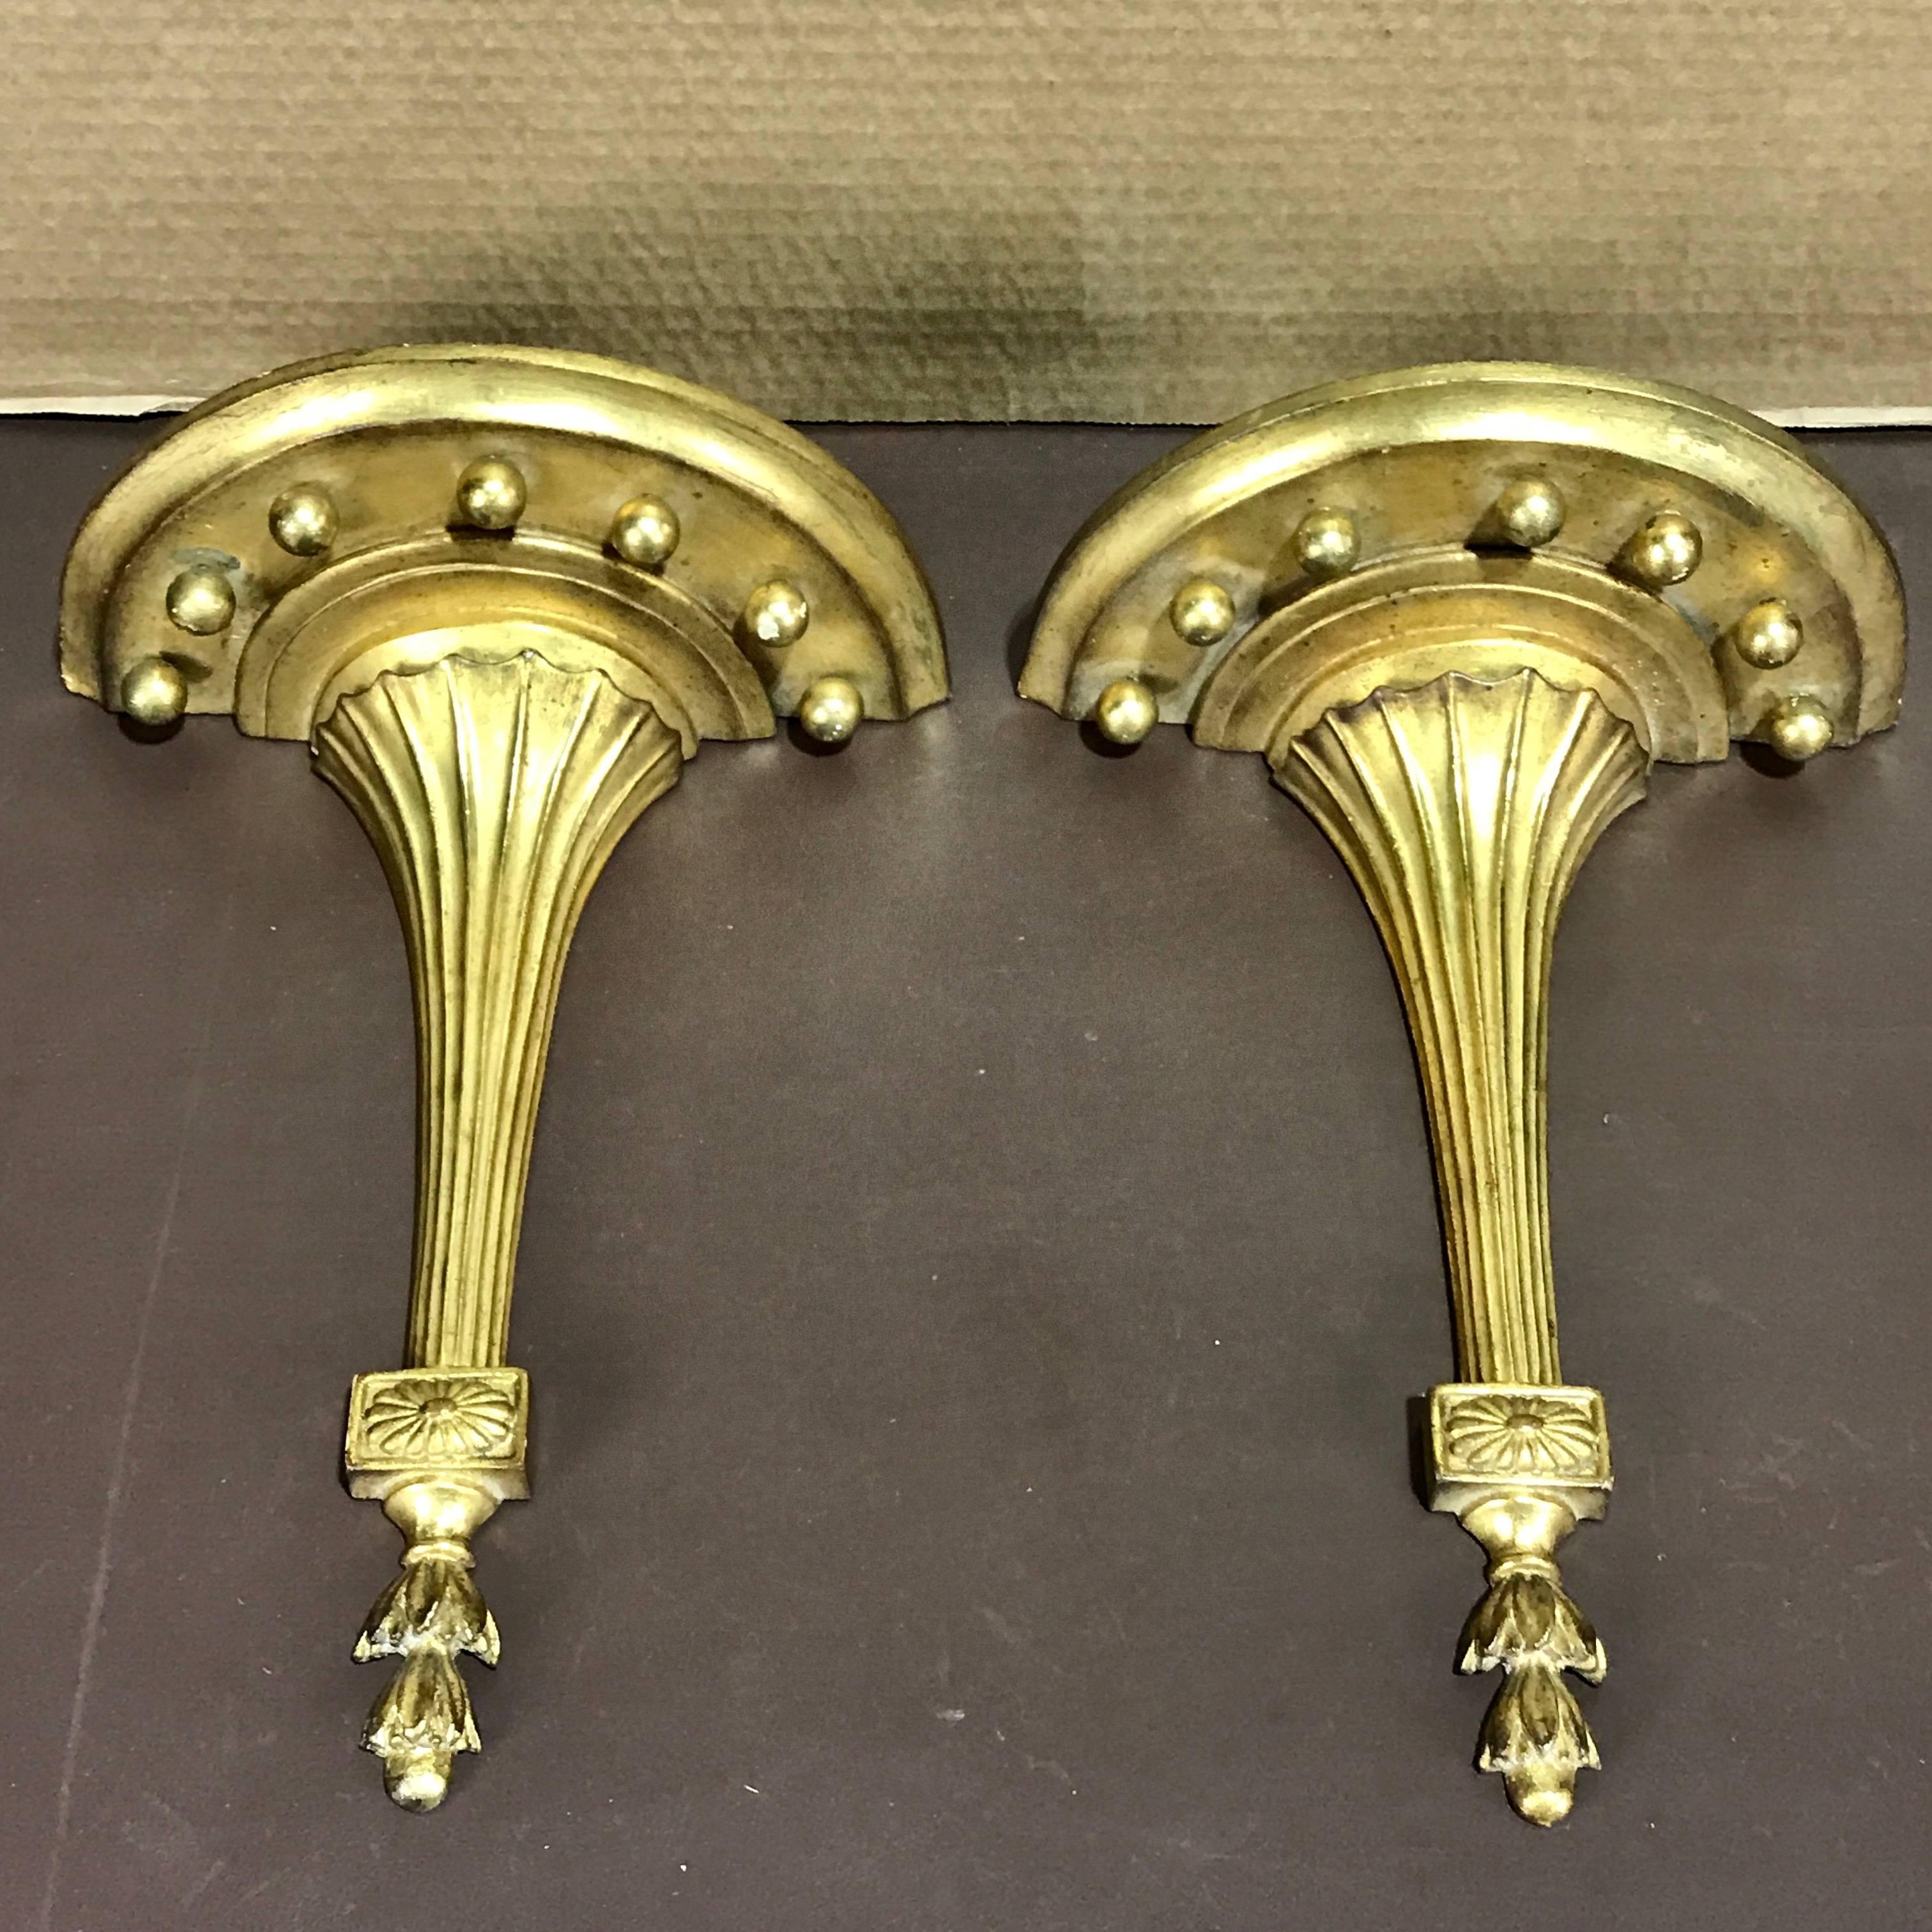 Pair of tall and sleek neoclassical gilt wall brackets, by Borghese
The Demilune shelf measures 10.5